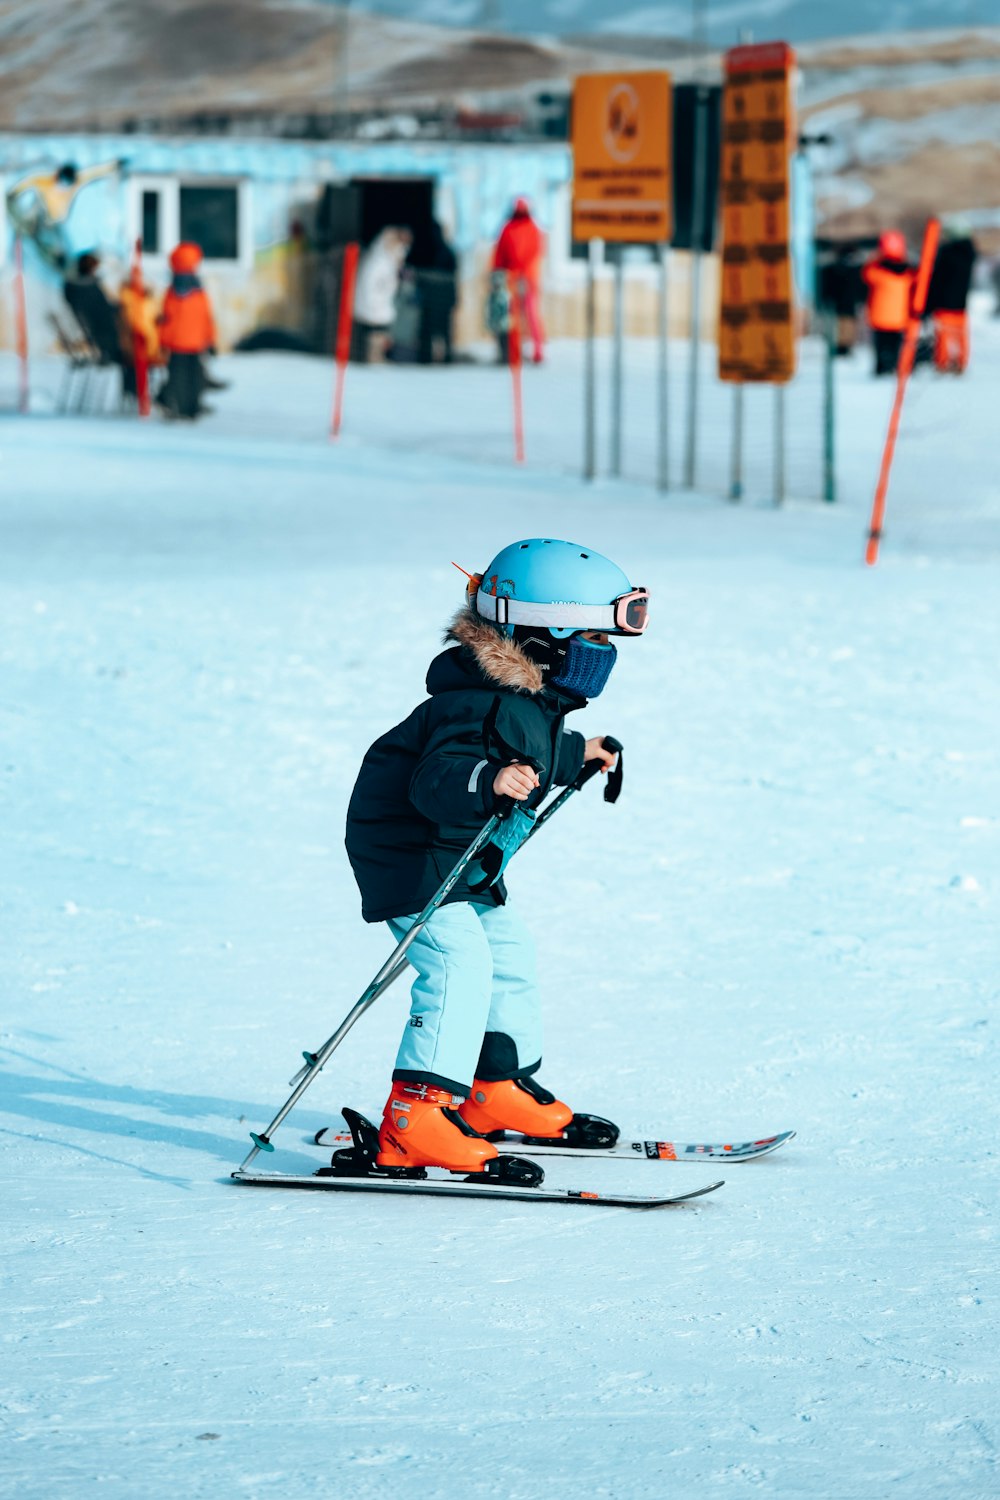 a young child riding skis down a snow covered slope